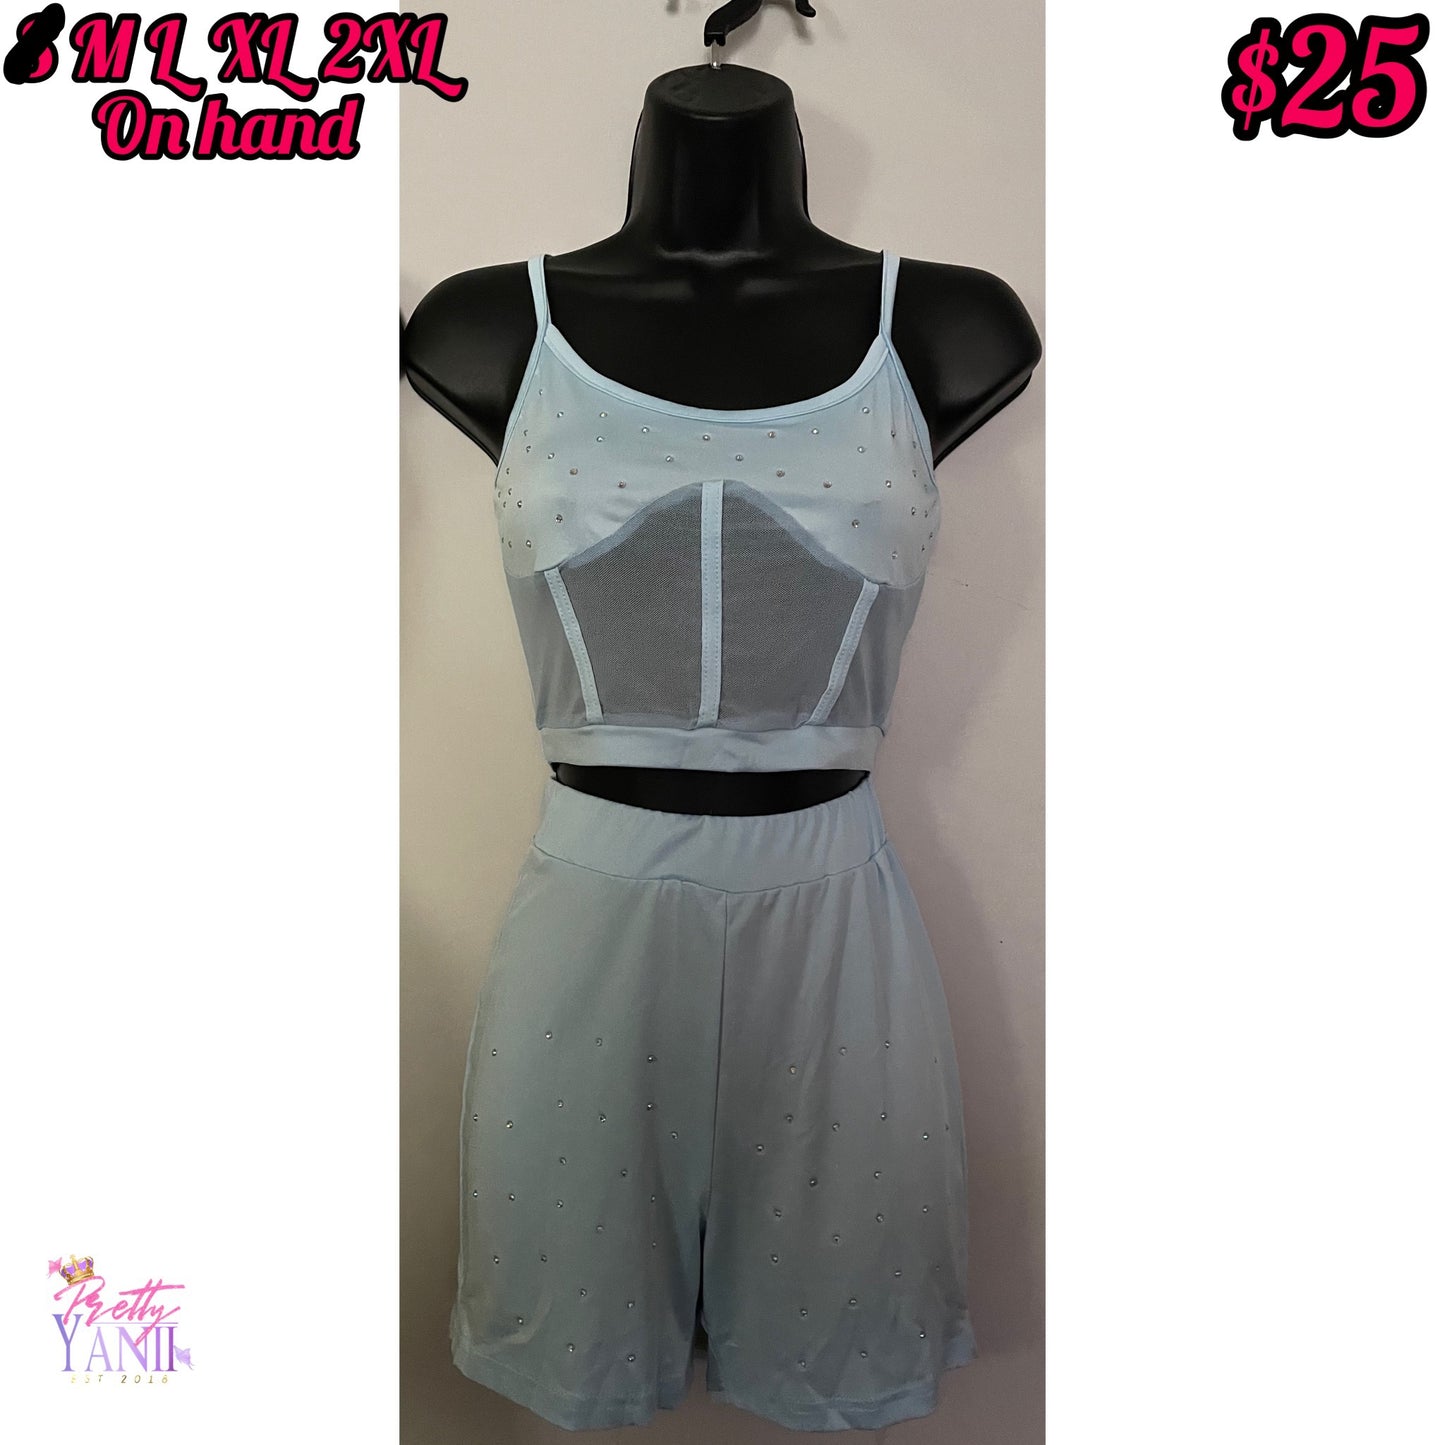 matching set includes a sky blue spaghetti strap crop top and high waist shorts, available in both regular and plus sizes